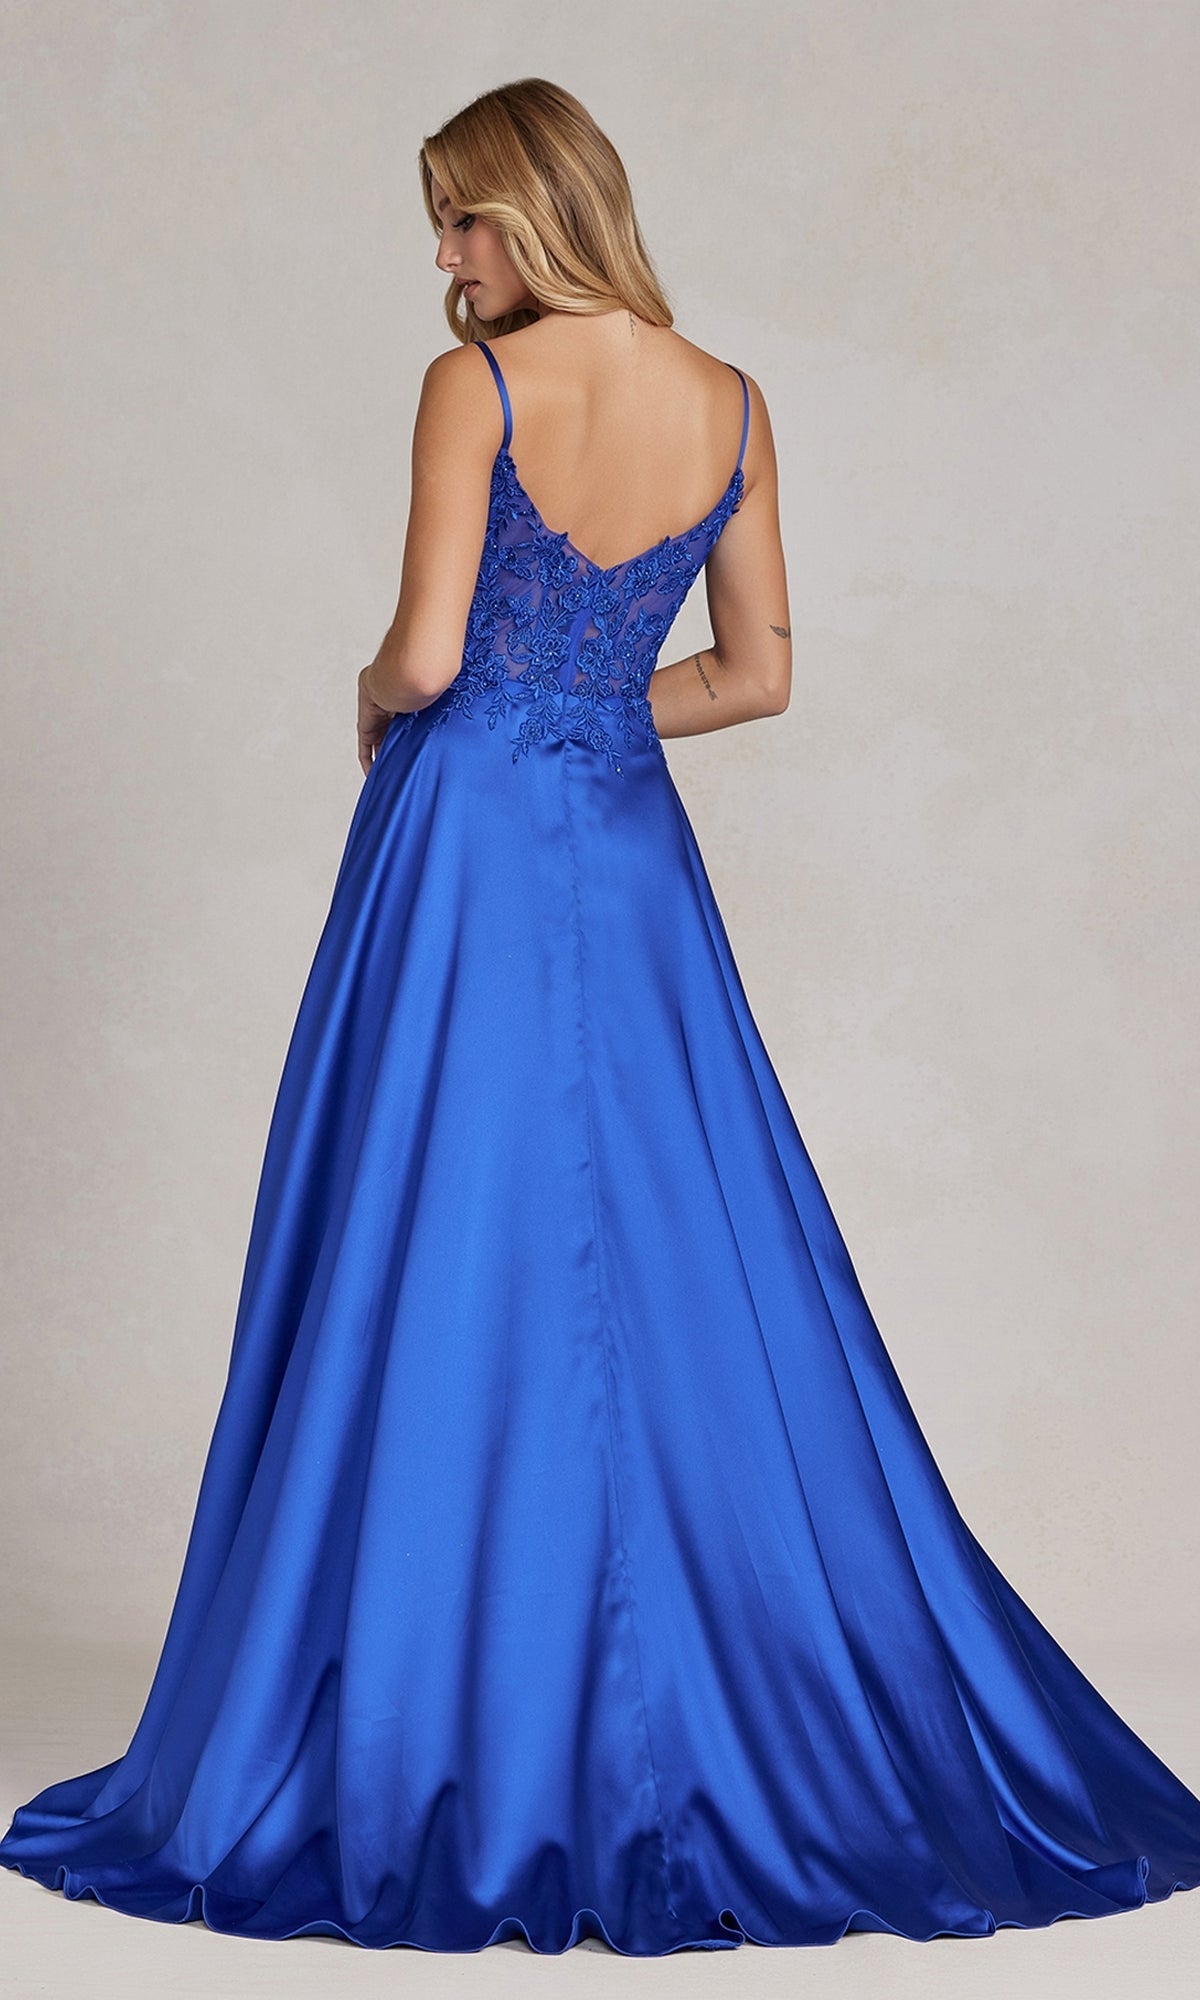  Long A-Line Prom Dress with Sheer-Lace Bodice